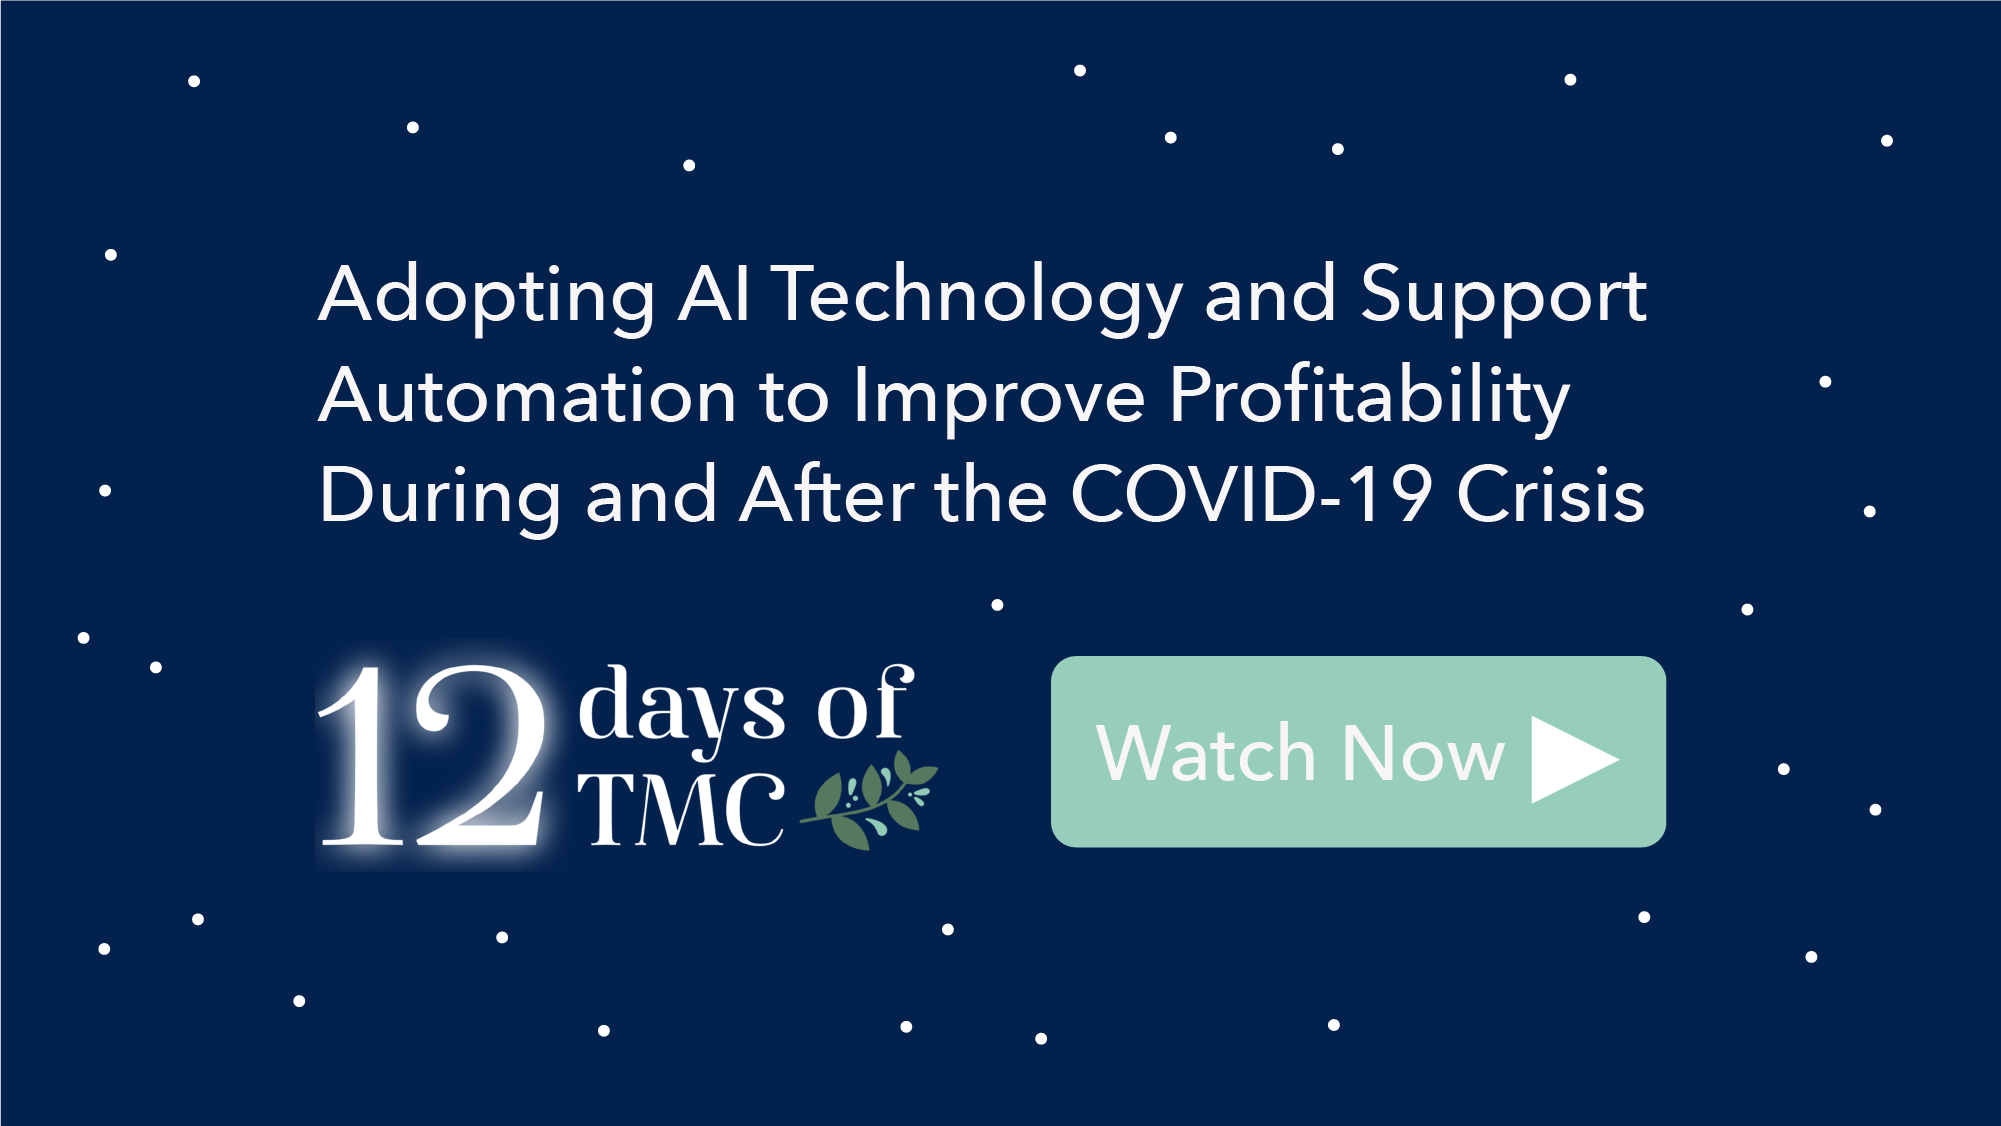 Adopting AI Technology and Support Automation to Improve Profitability During and After the COVID-19 Crisis